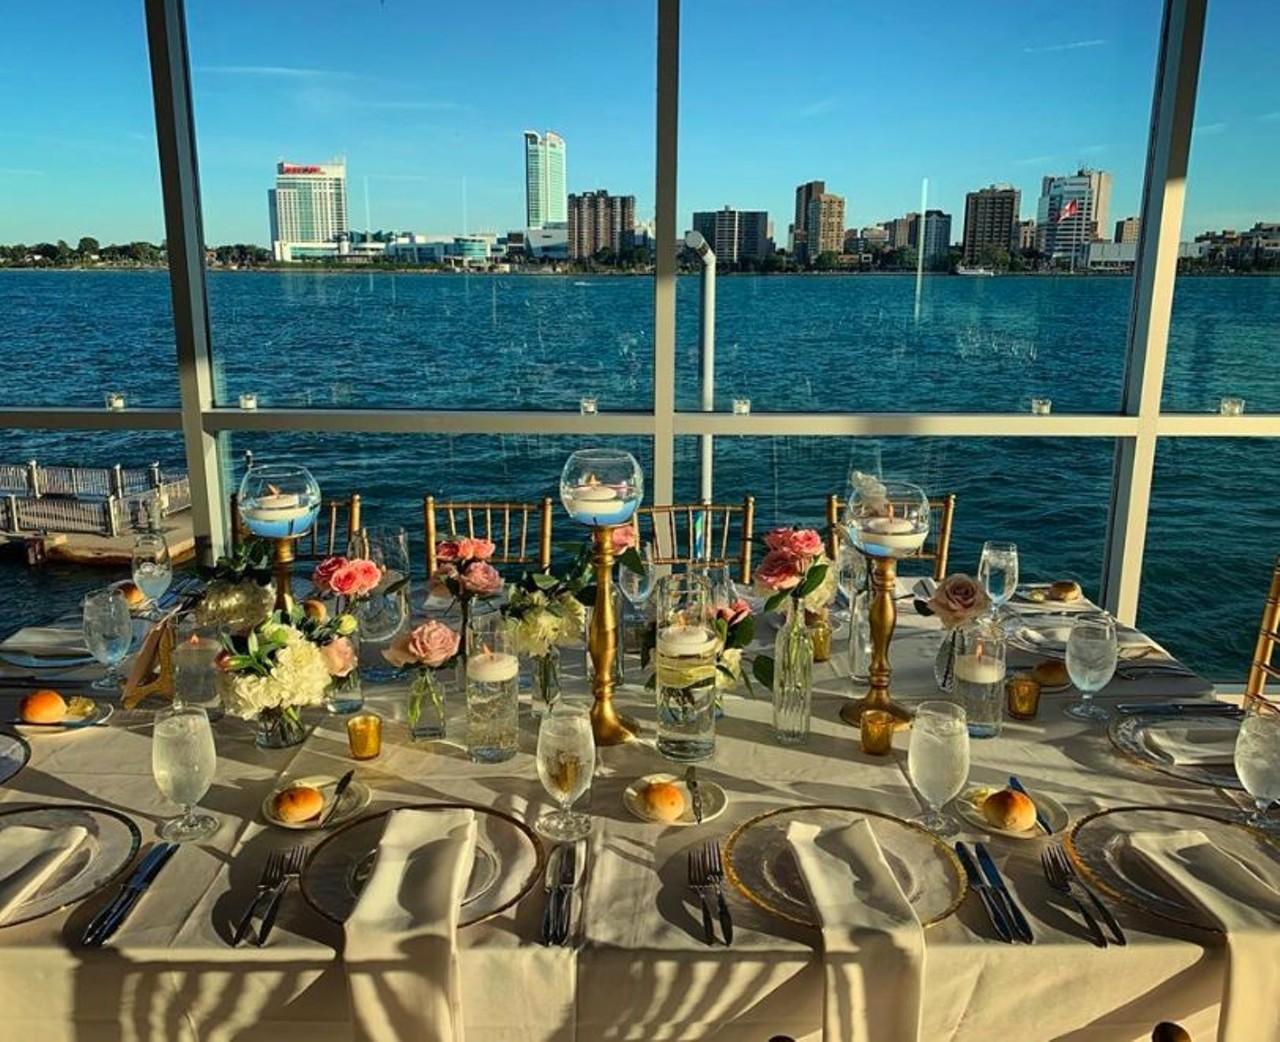 Waterview Loft
130 E Atwater St.; 313-307-4925; waterviewloft.com
With a window-lined event space overlooking the Detroit River, this sunny venue is excellent for a daytime wedding. During the evening, the lights of the city make this a magical spot.&nbsp;&nbsp;
Photo via Waterview Loft at Port Detroit / Facebook